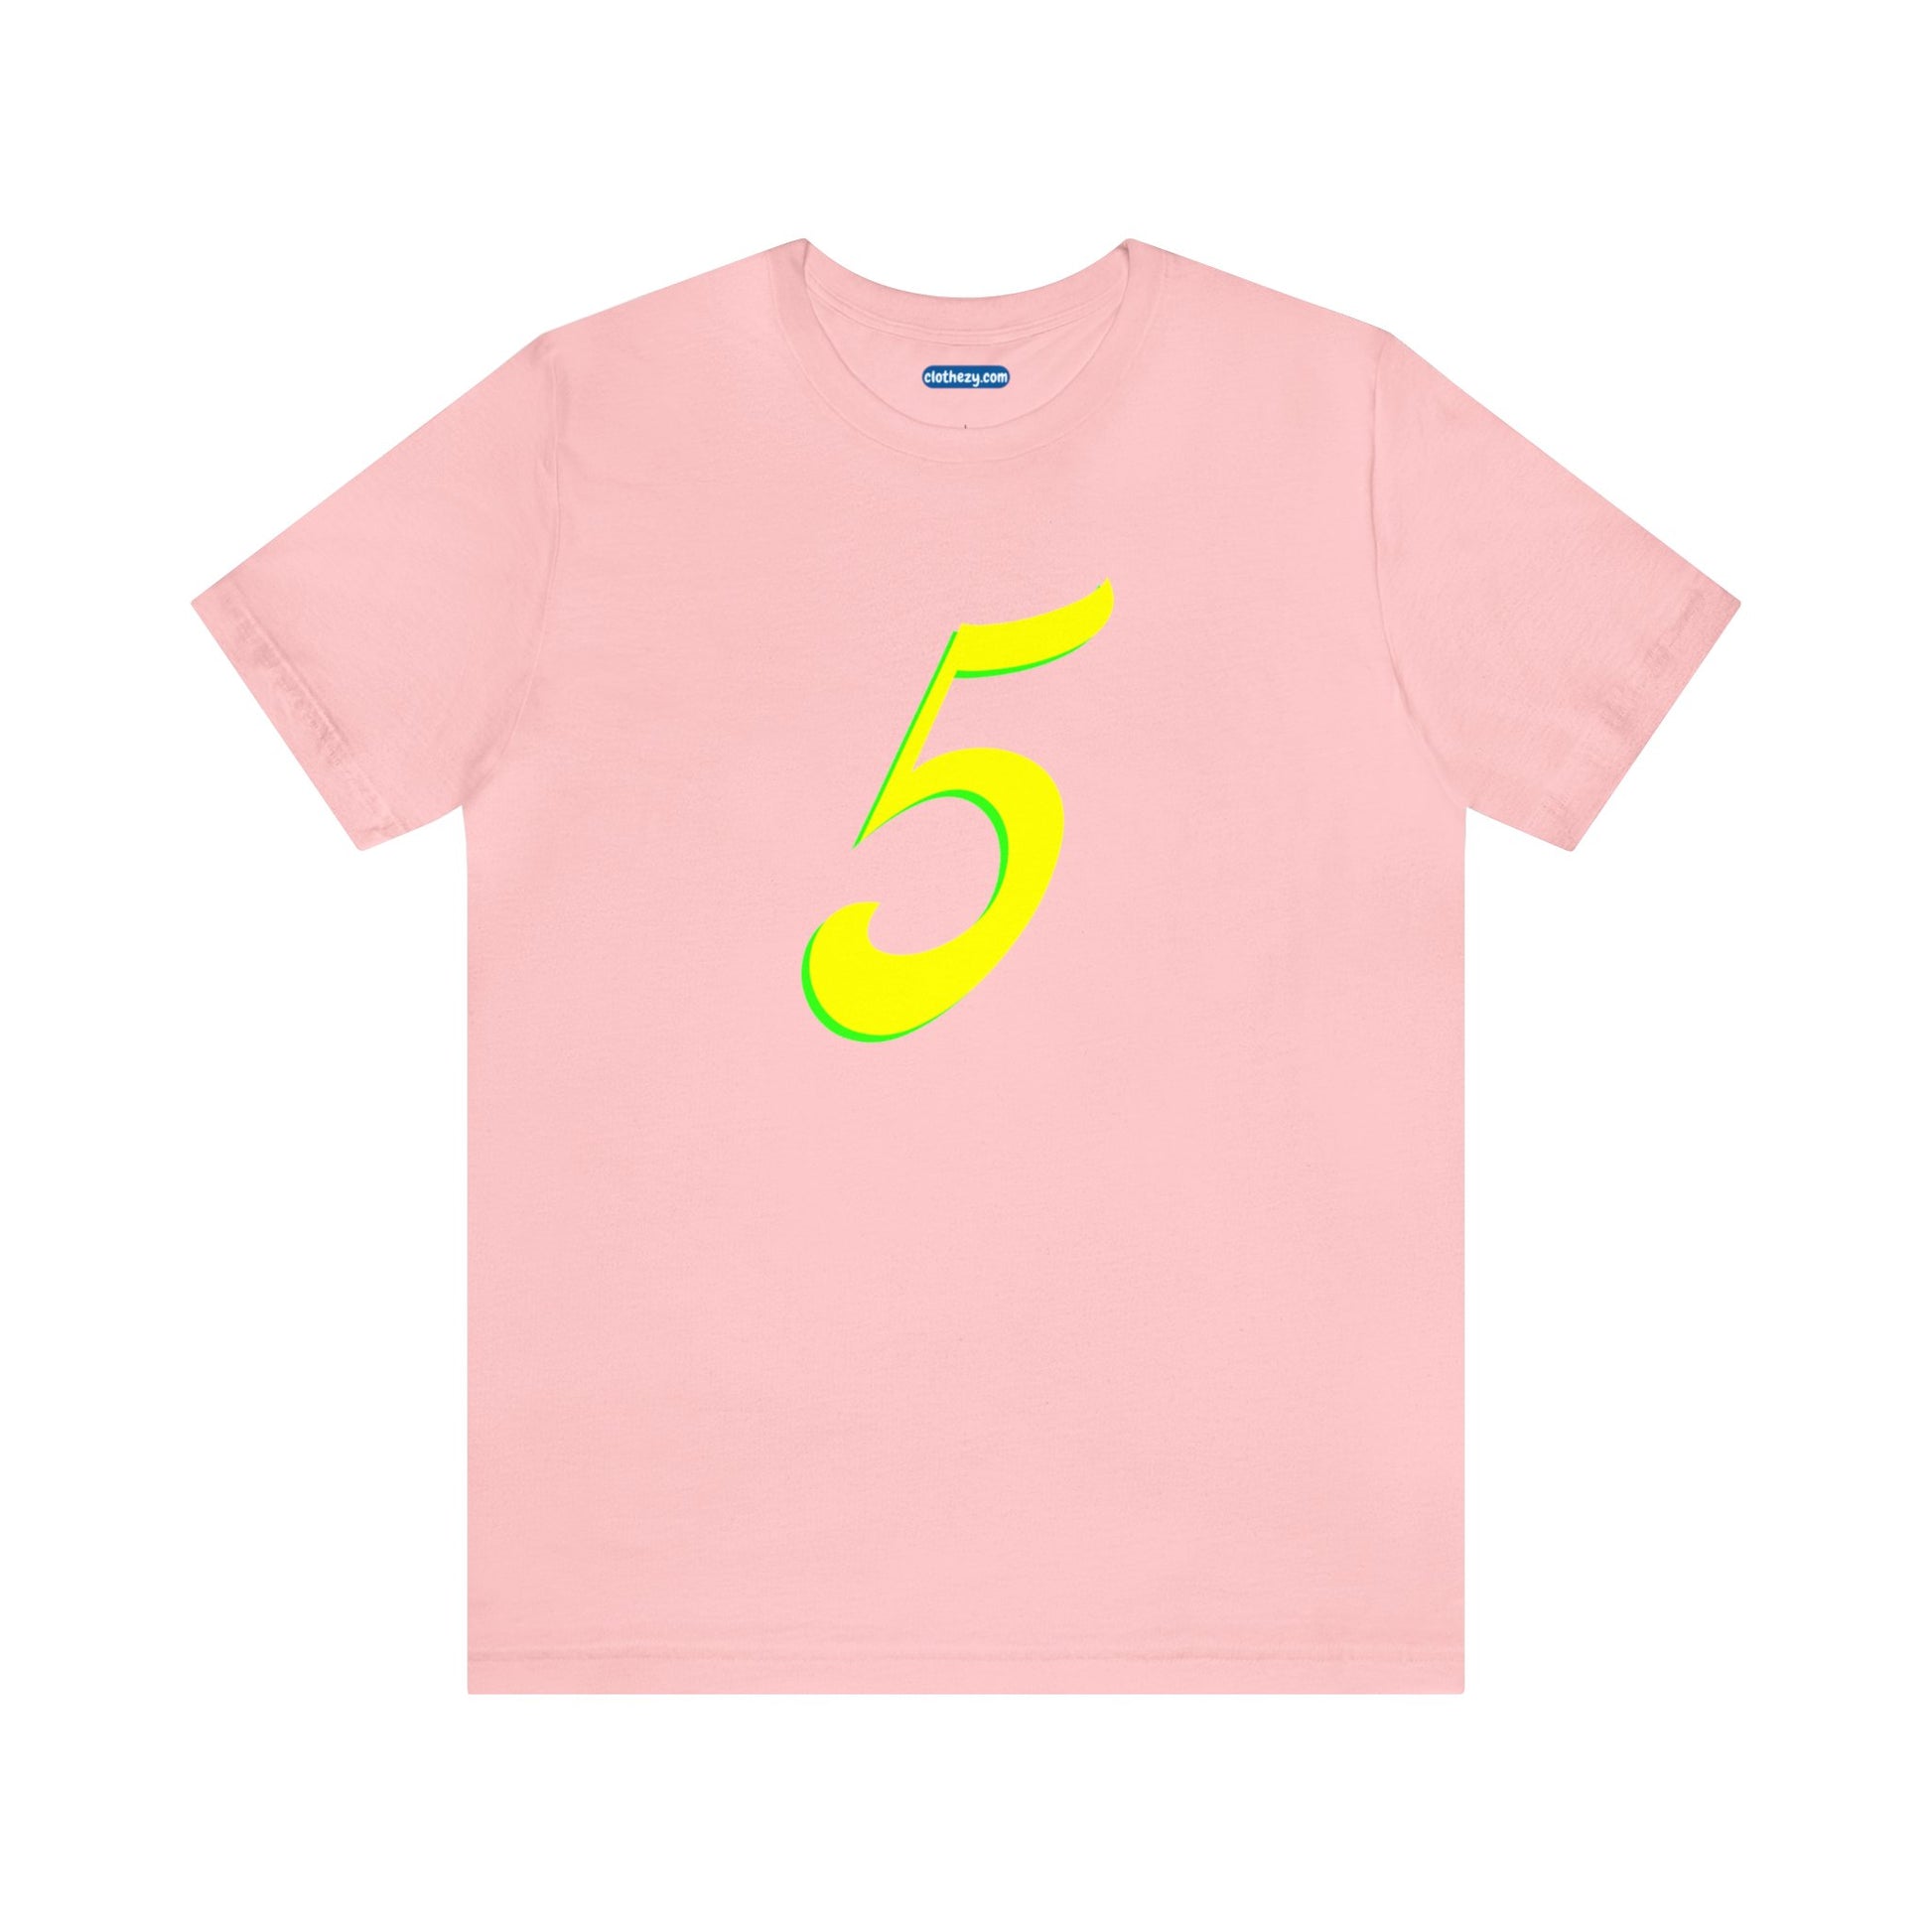 Number 5 Design - Soft Cotton Tee for birthdays and celebrations, Gift for friends and family, Multiple Options by clothezy.com in Pink Size Small - Buy Now